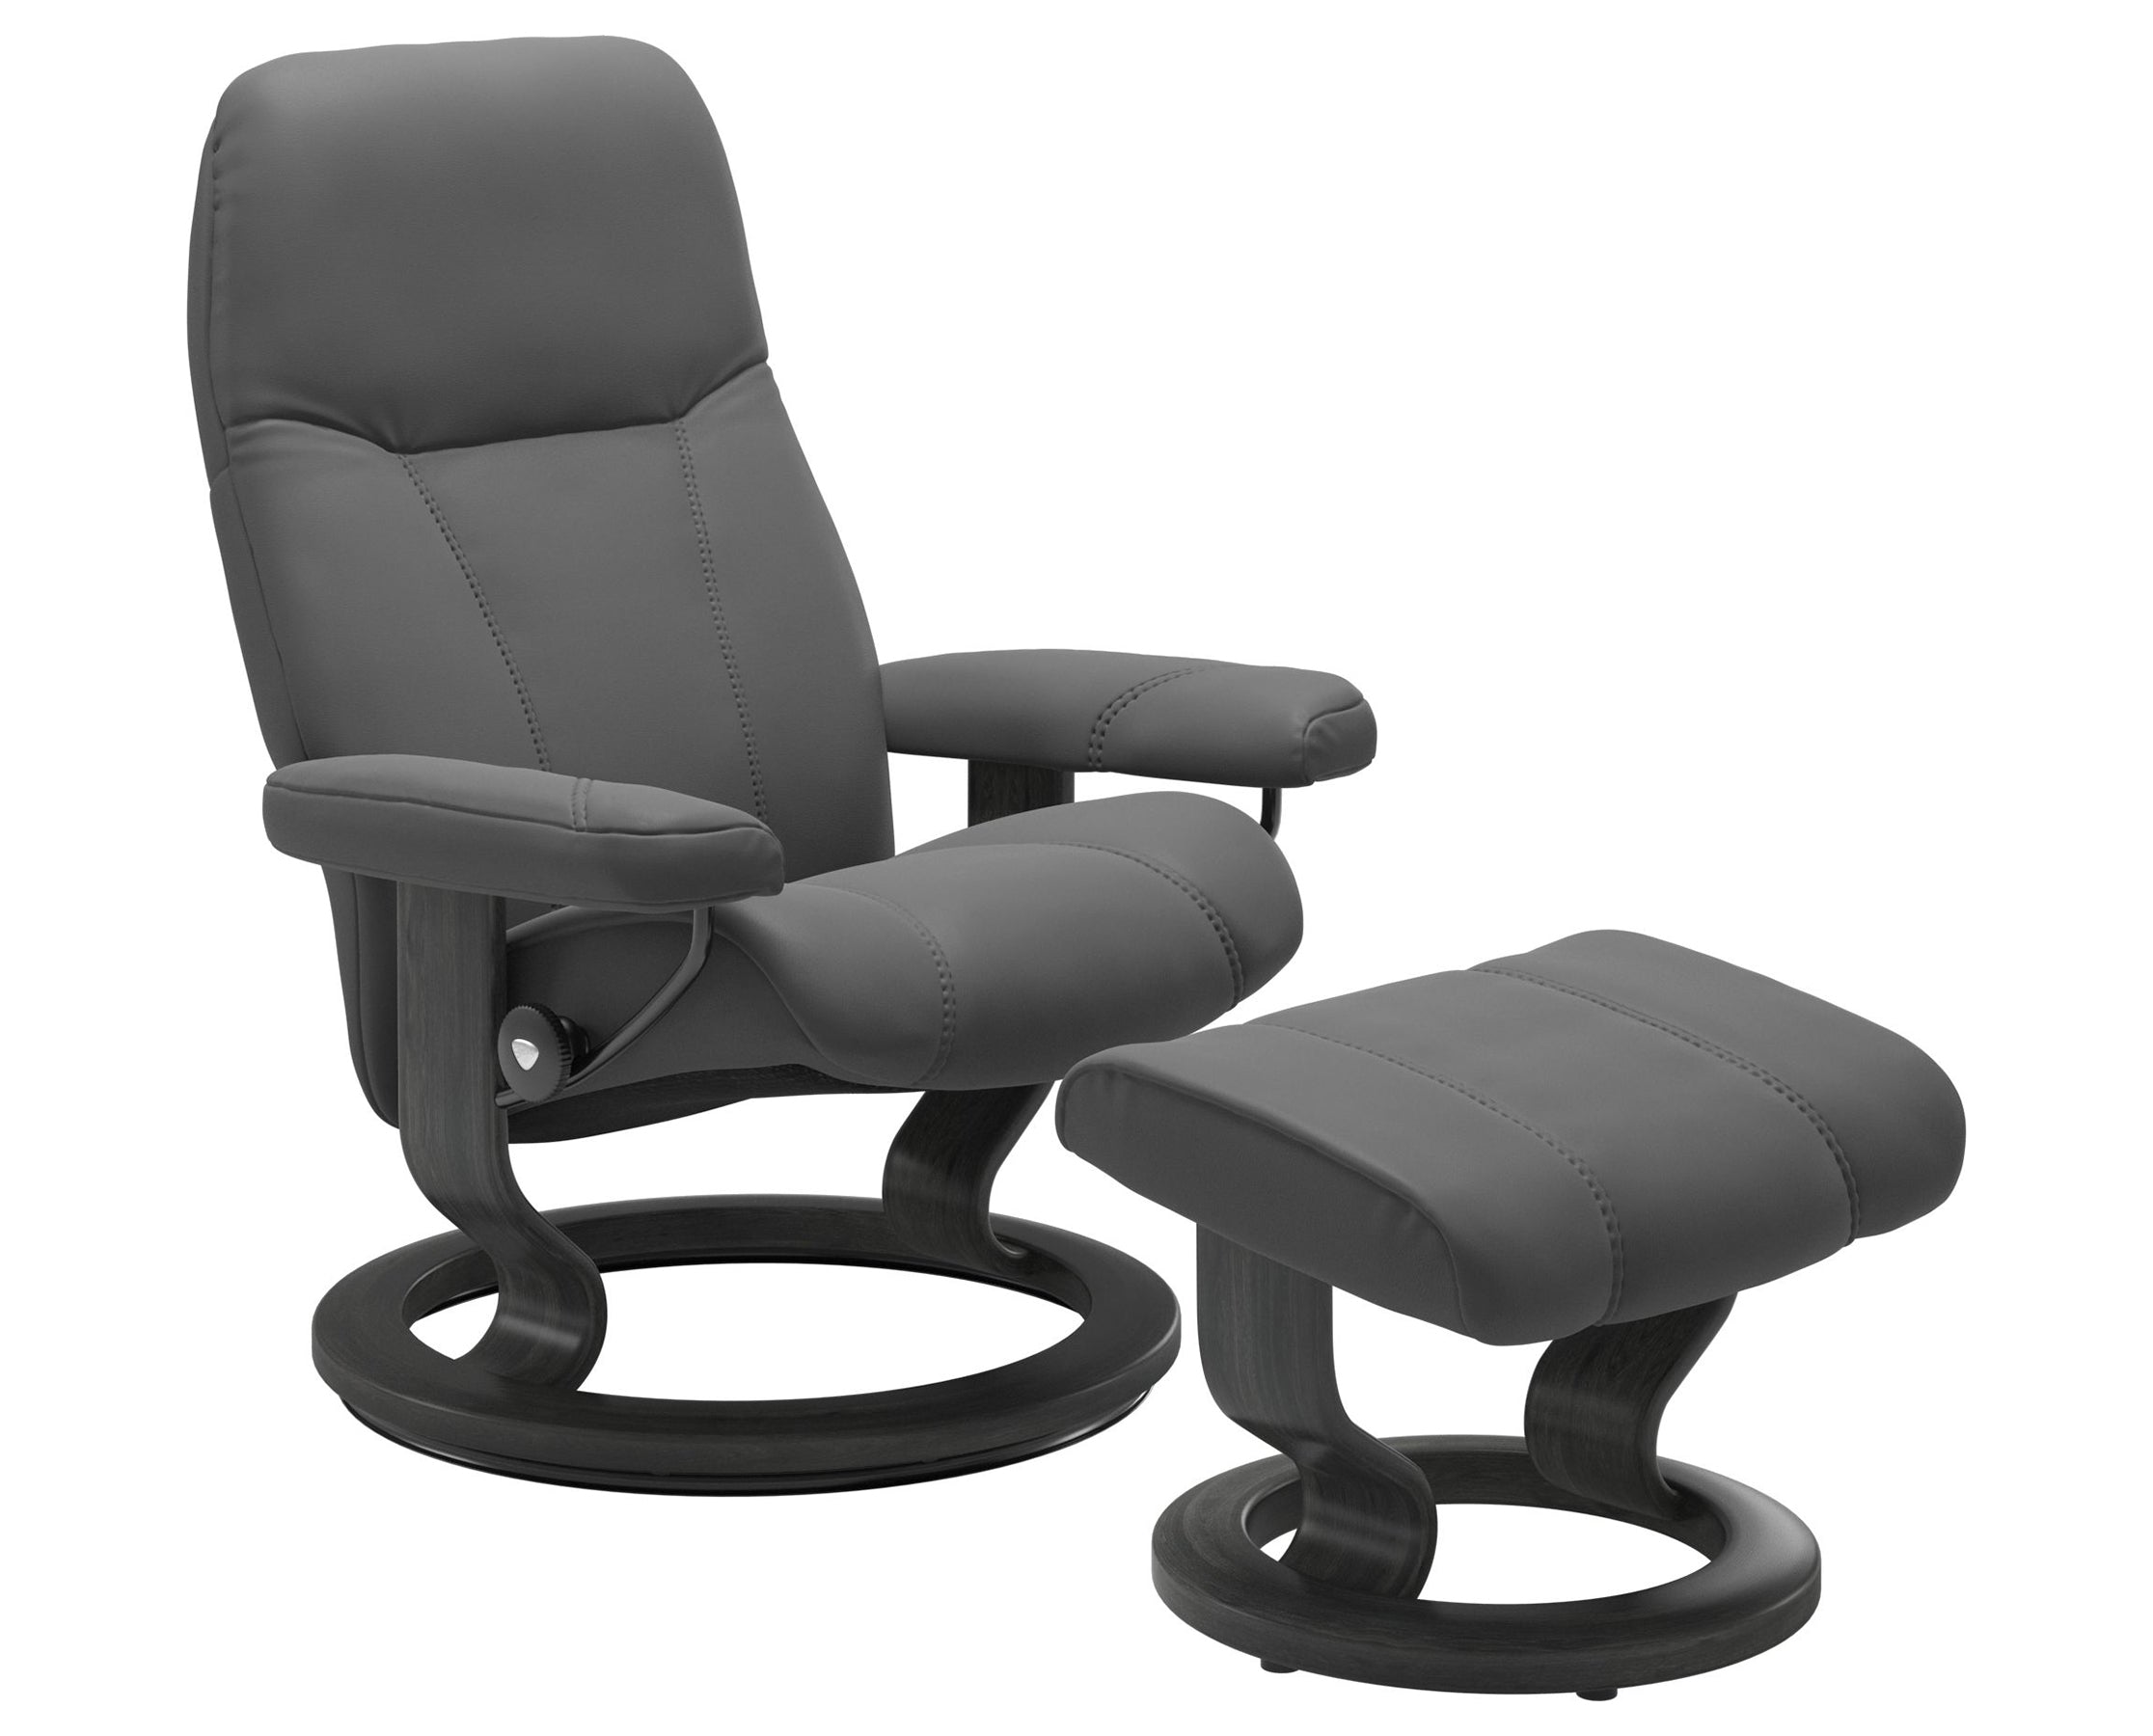 Batick Leather Grey S/M/L and Grey Base | Stressless Consul Classic Recliner | Valley Ridge Furniture